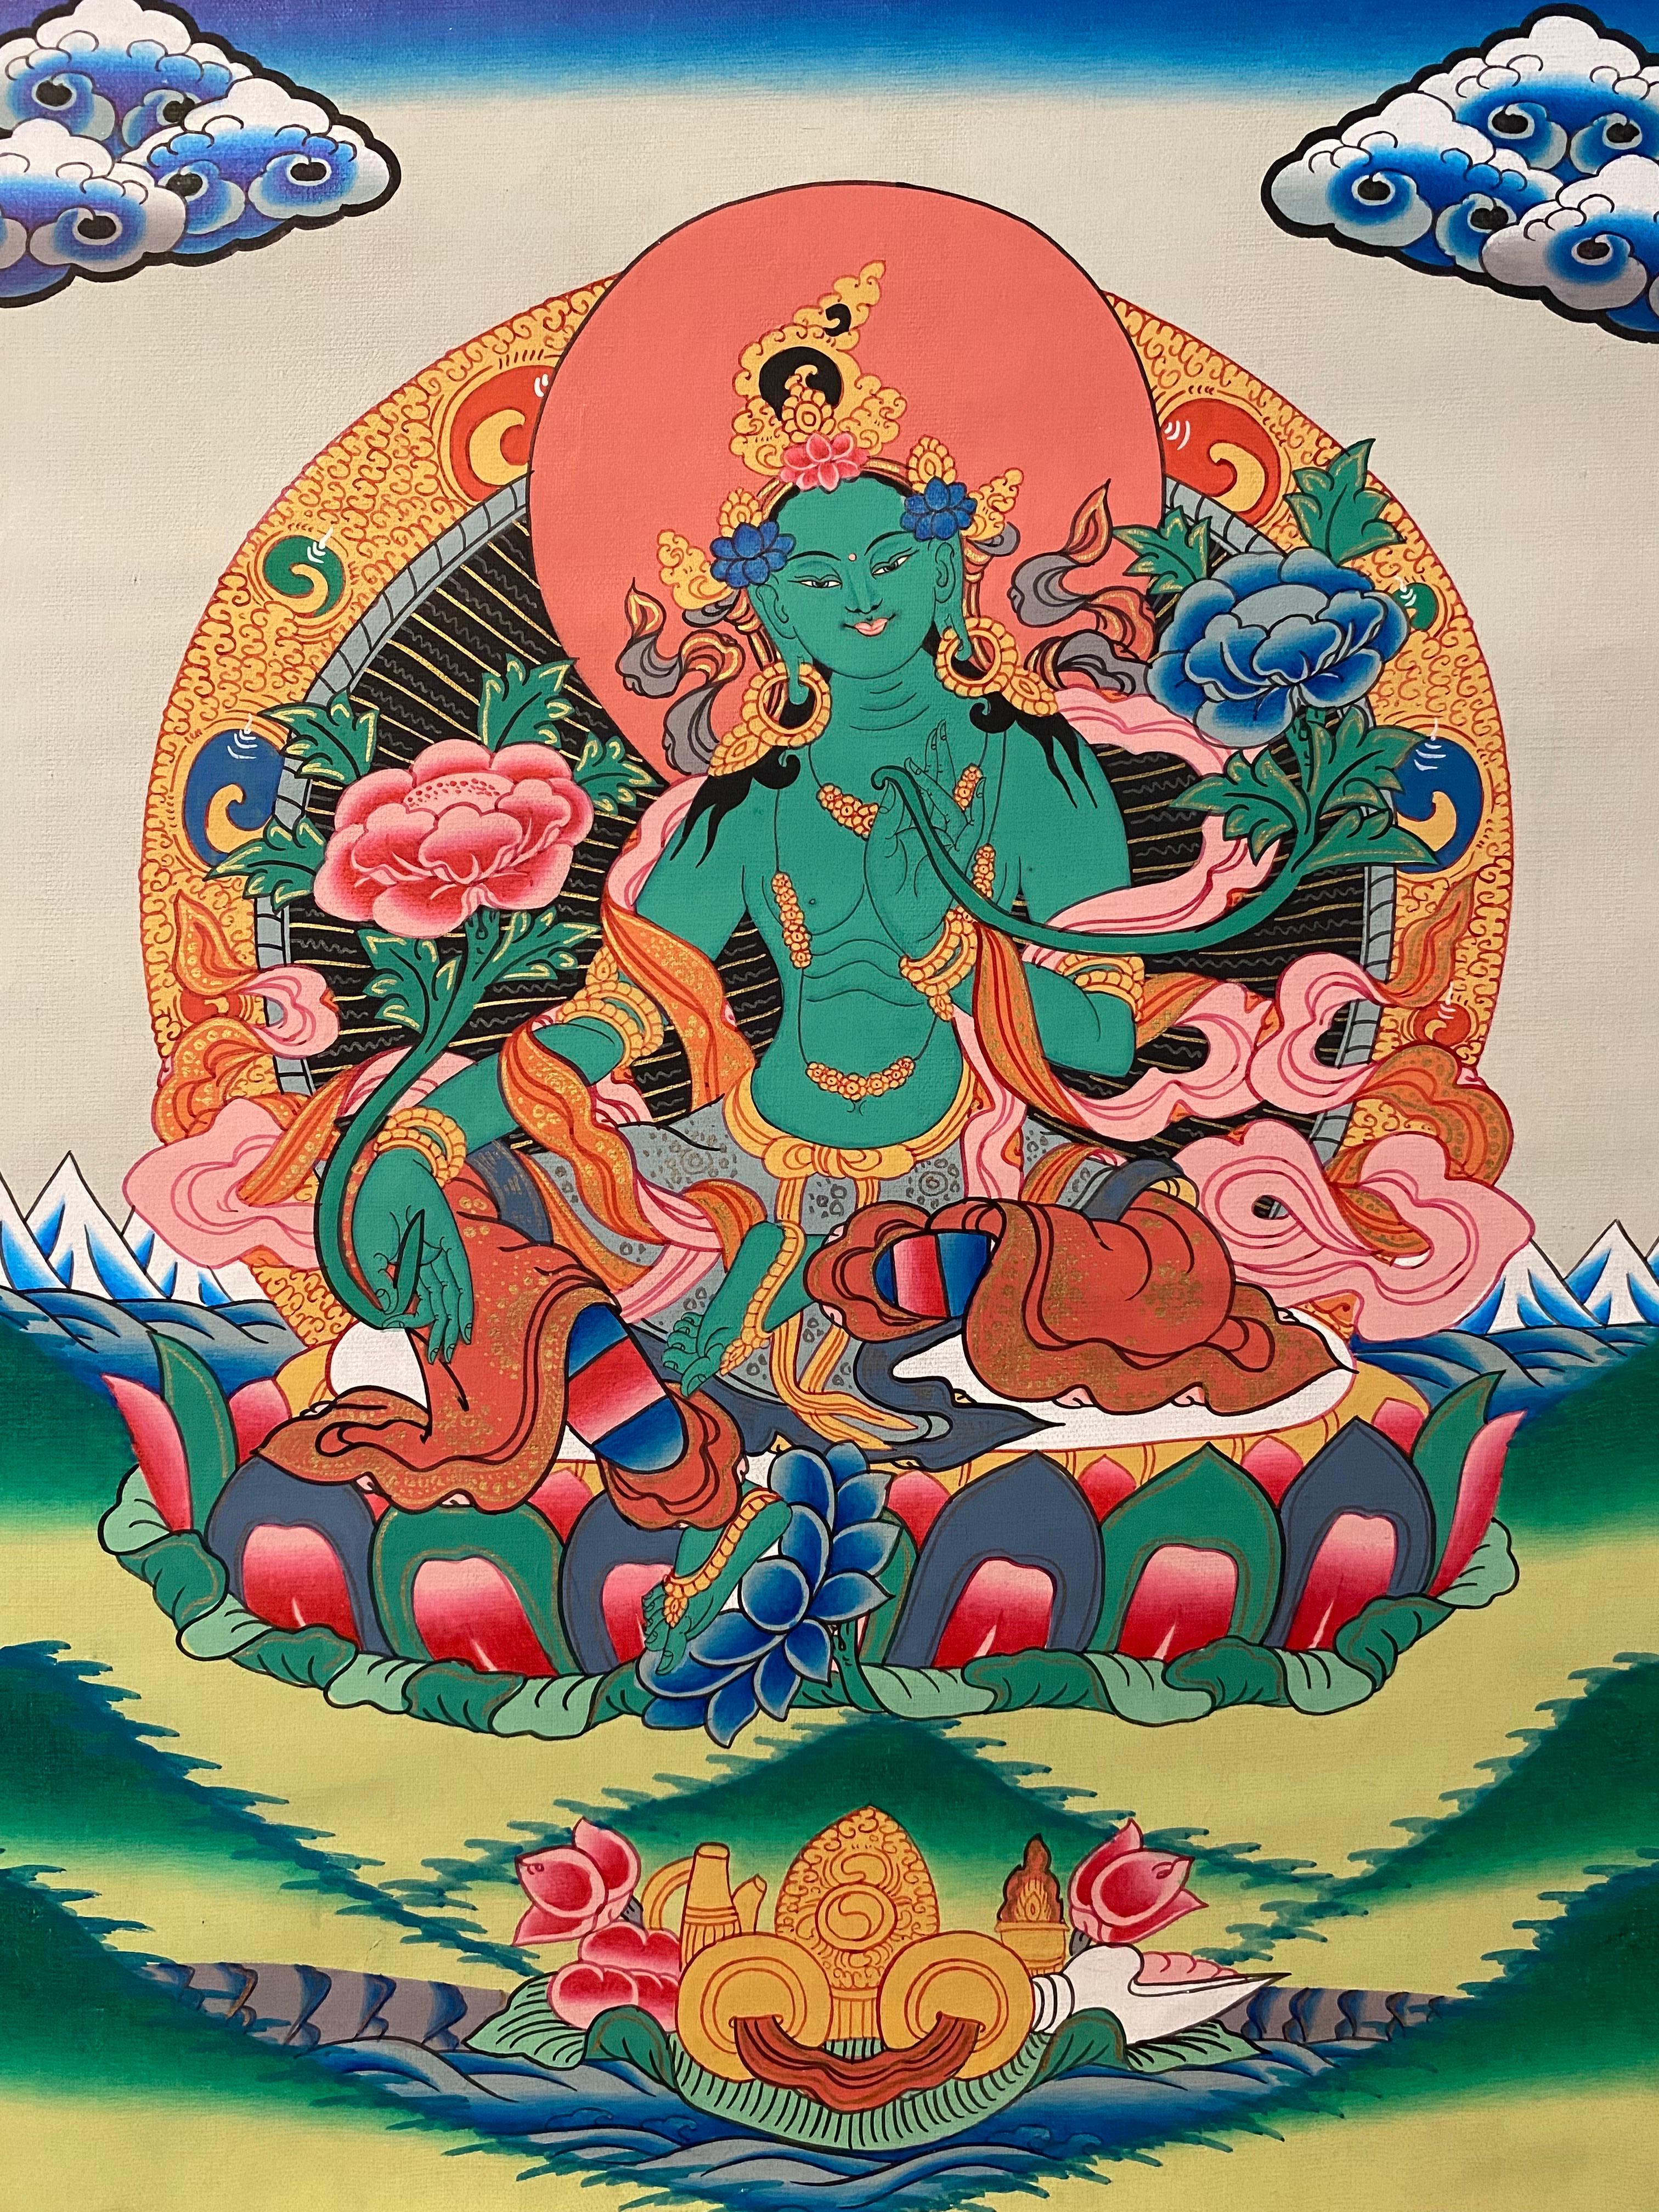 Tara is the most beloved of all the female enlightened beings in the Tibetan Buddhist pantheon. The essence of awakened love and compassion, she is known as “the mother of all the buddhas” and “she who ferries beings across the ocean of